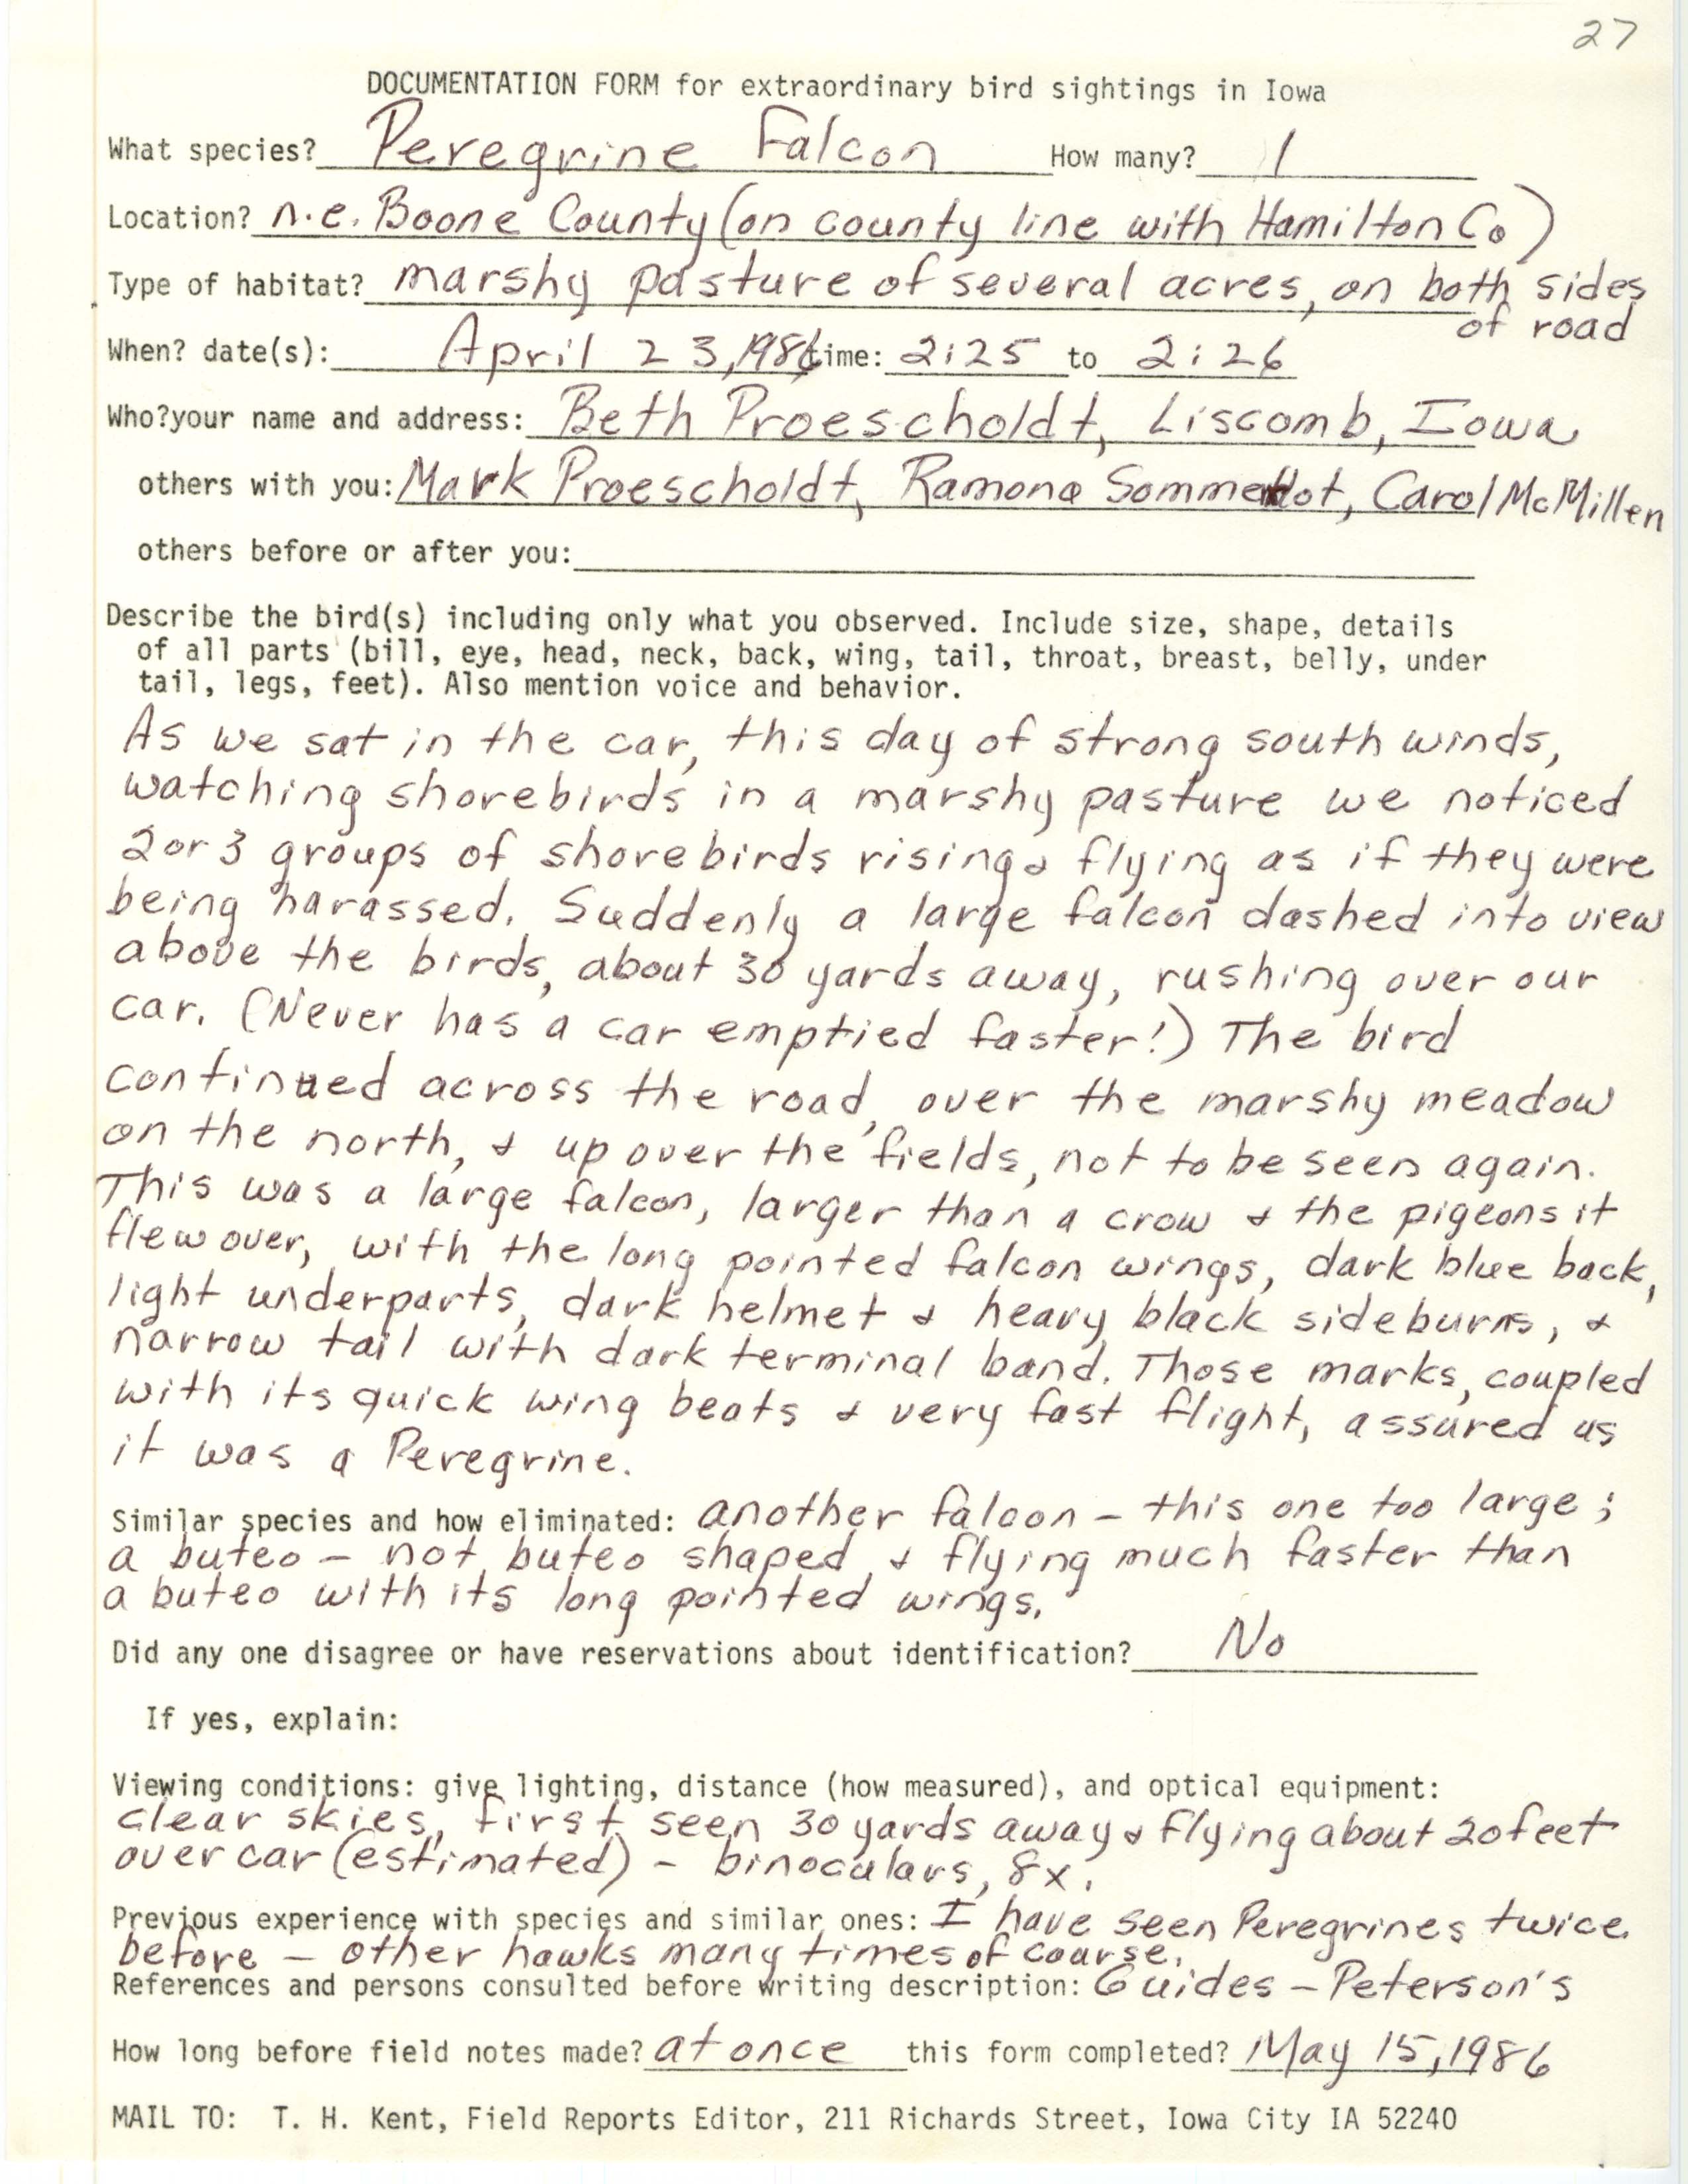 Rare bird documentation form for Peregrine Falcon at northeast Boone County, 1986